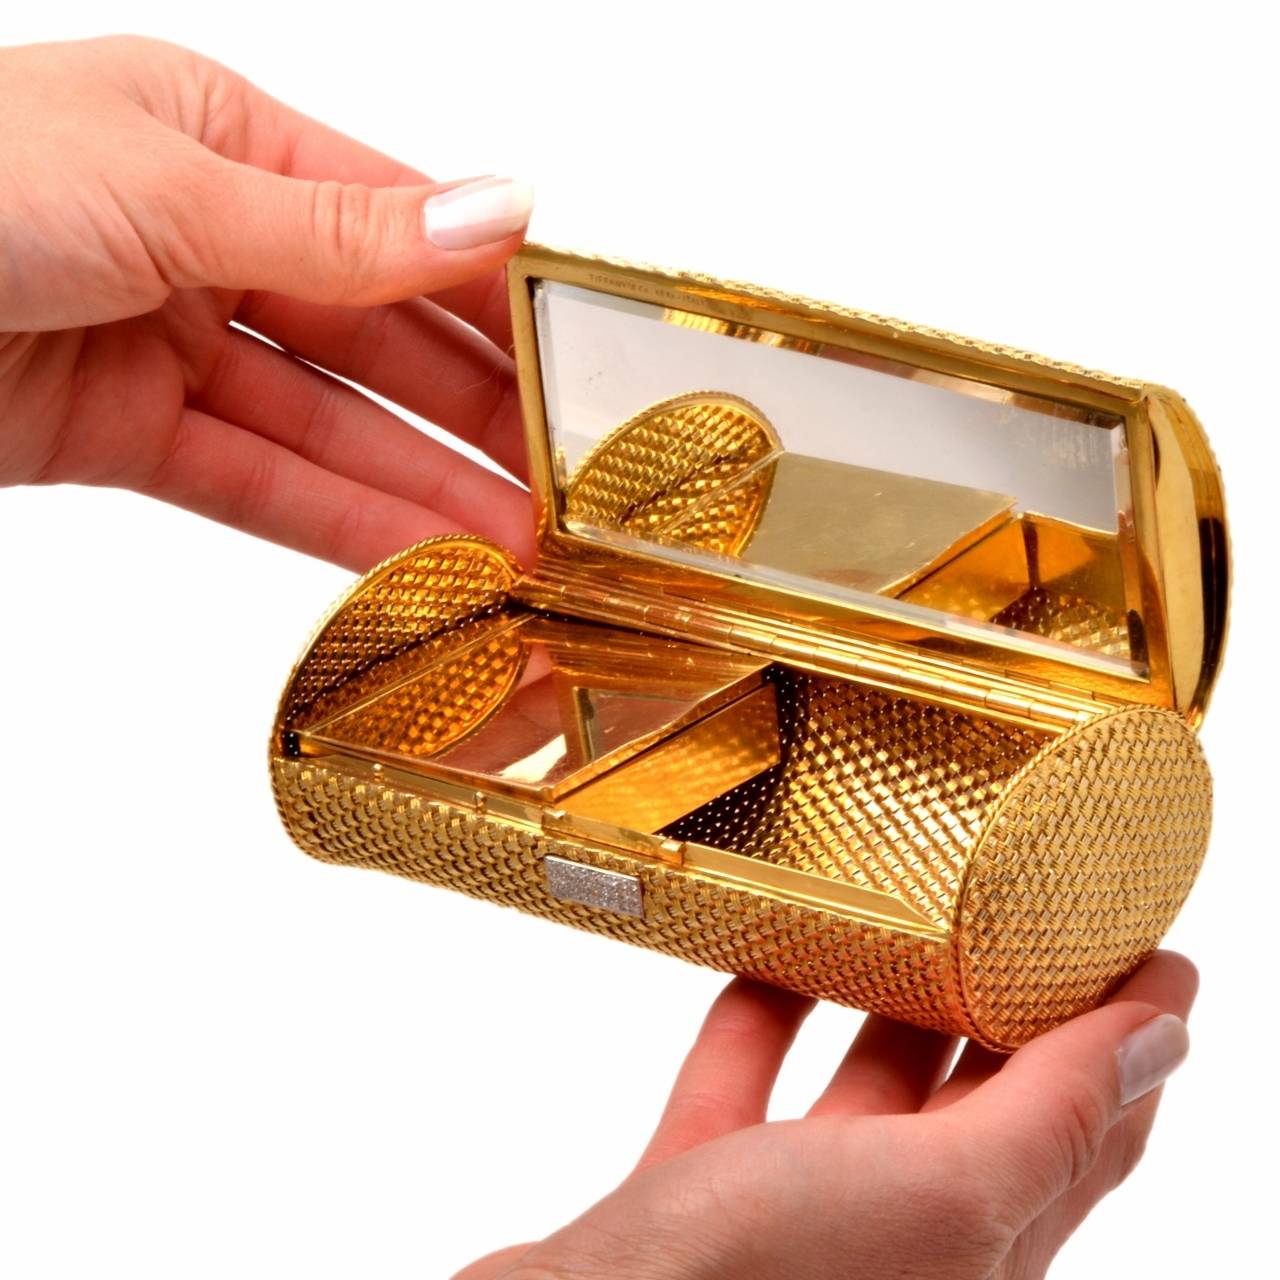 This 1960's Tiffany & Co. Clutch Purse & compact is of Italian provenance, crafted in solid 18K yellow gold, weighing 477.6 grams and measuring 5.5